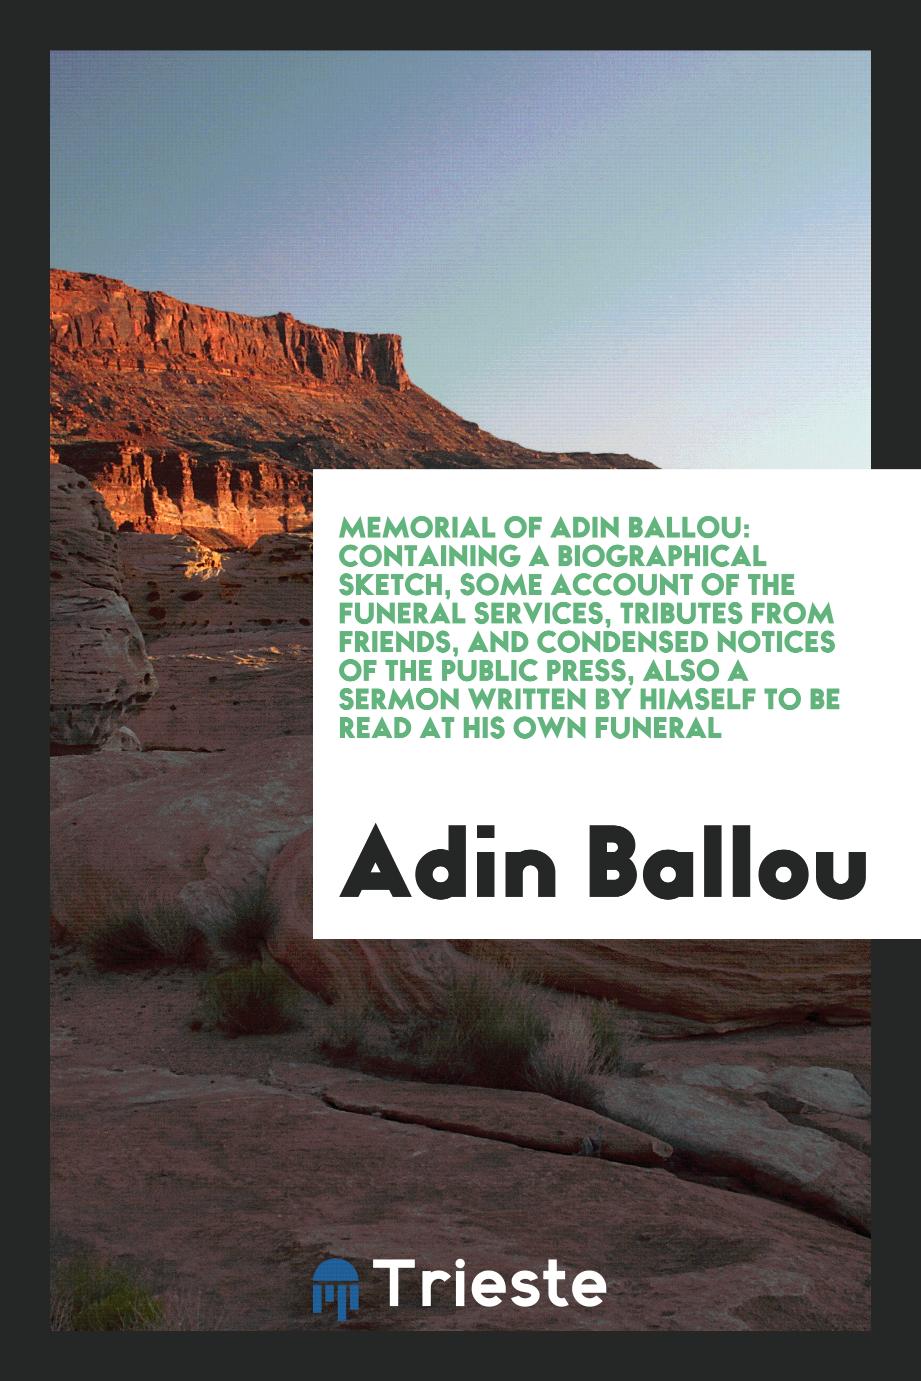 Memorial of Adin Ballou: Containing a Biographical Sketch, Some Account of the Funeral Services, Tributes from Friends, and Condensed Notices of the Public Press, Also a Sermon Written by Himself to Be Read at His Own Funeral